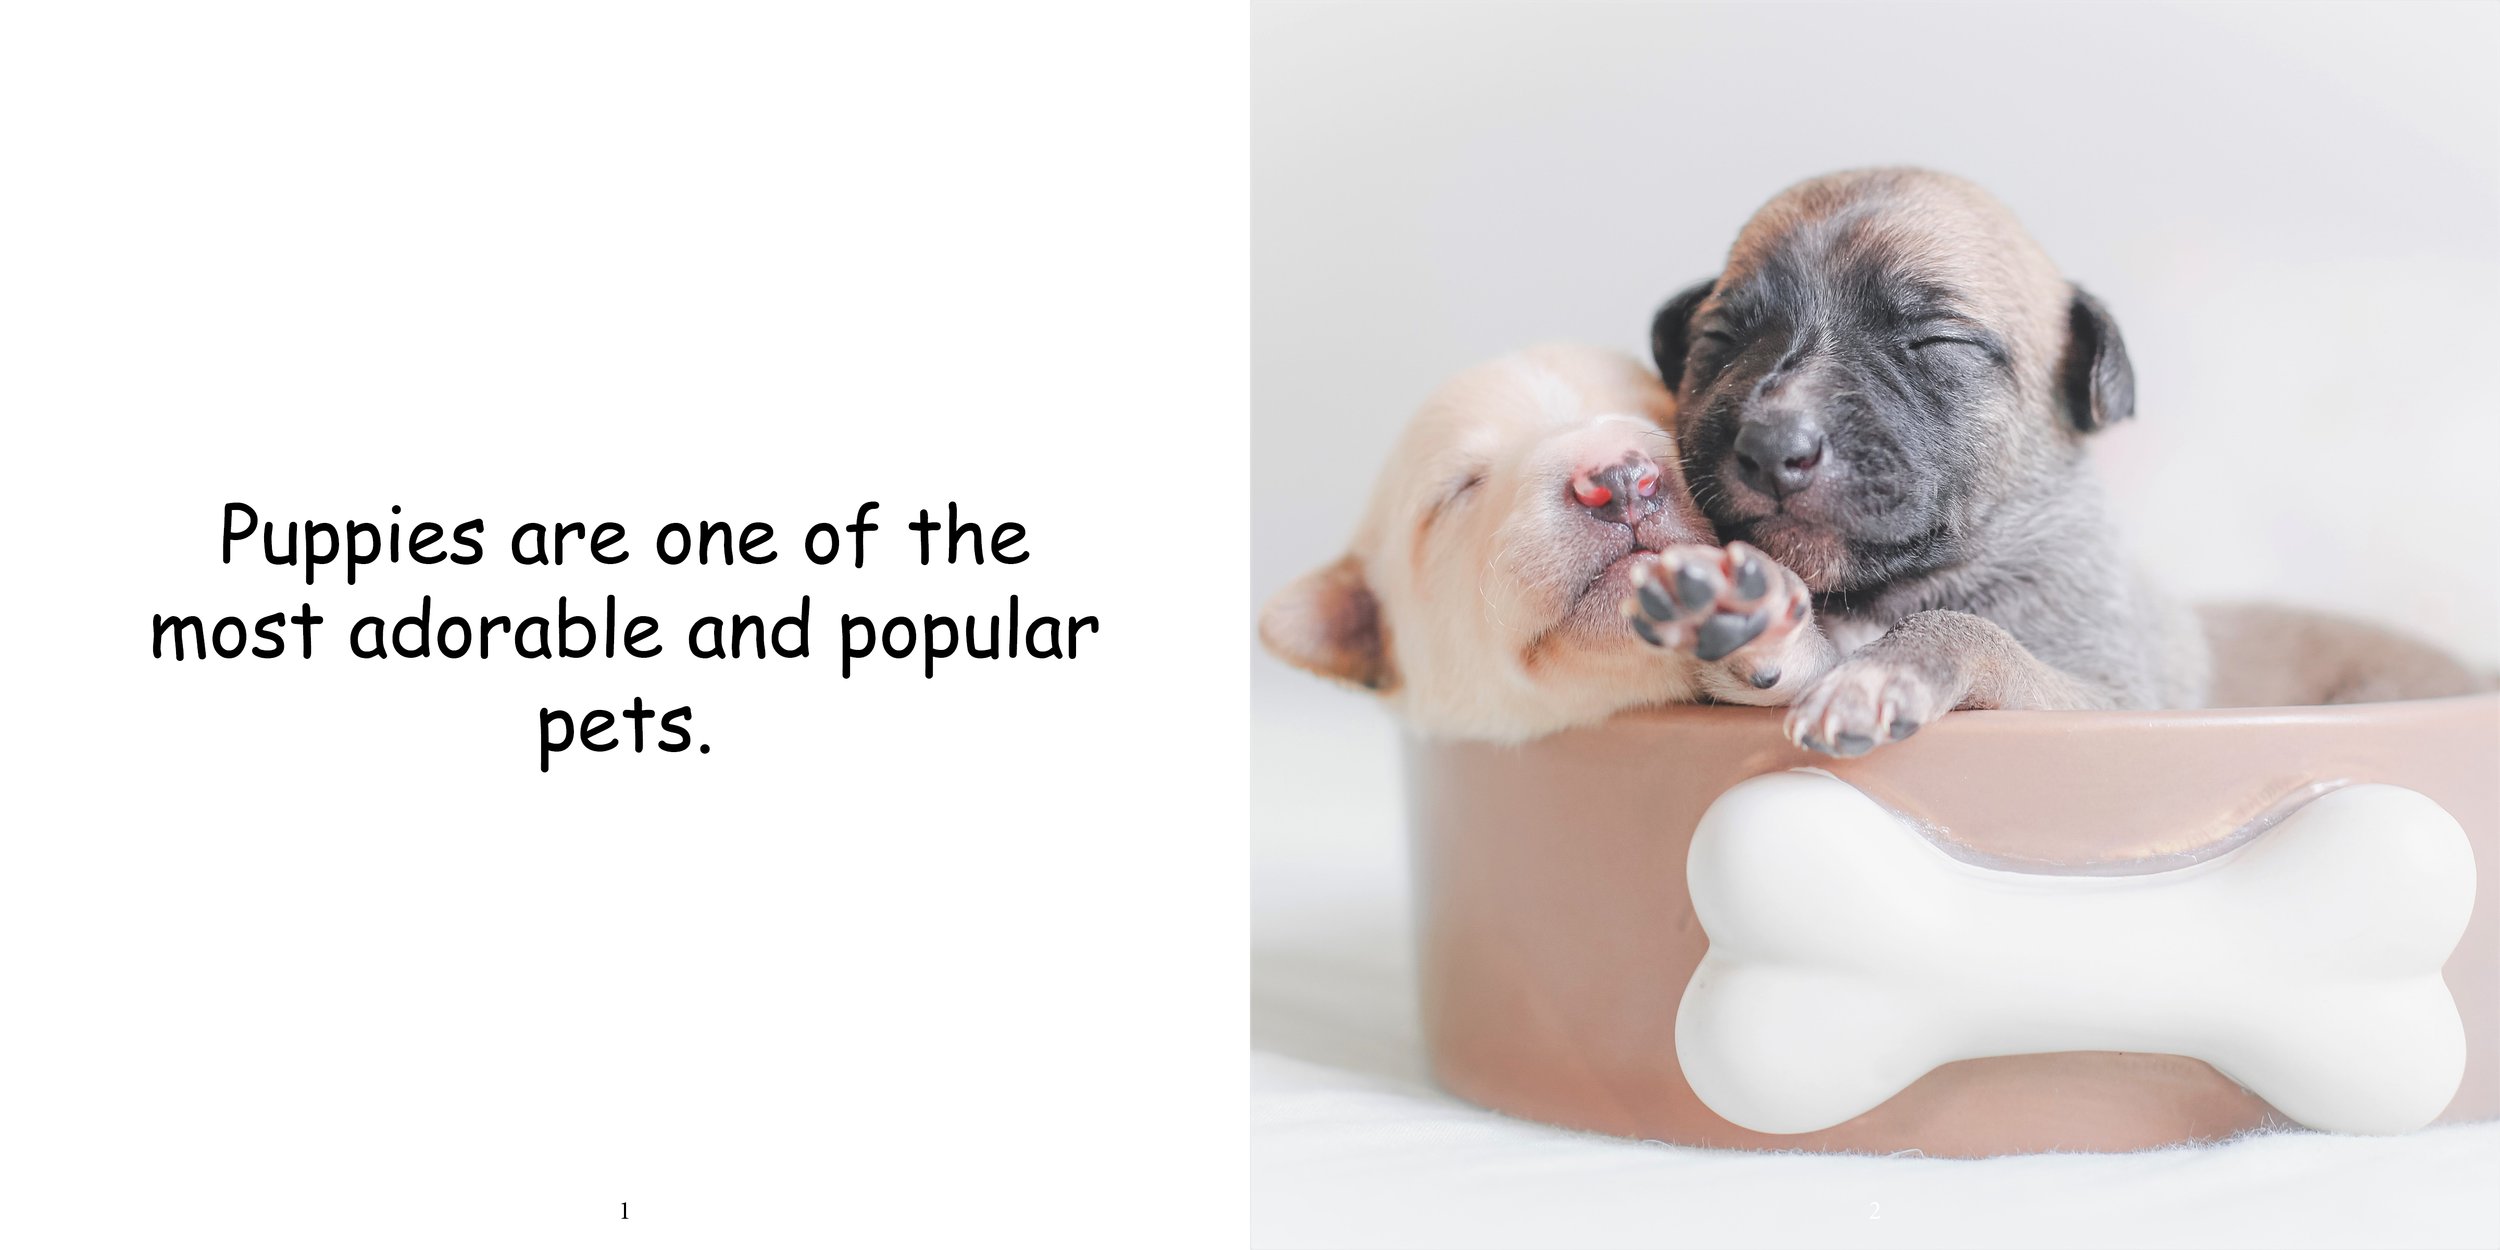 Everything about Puppies - Animal Series6.jpg